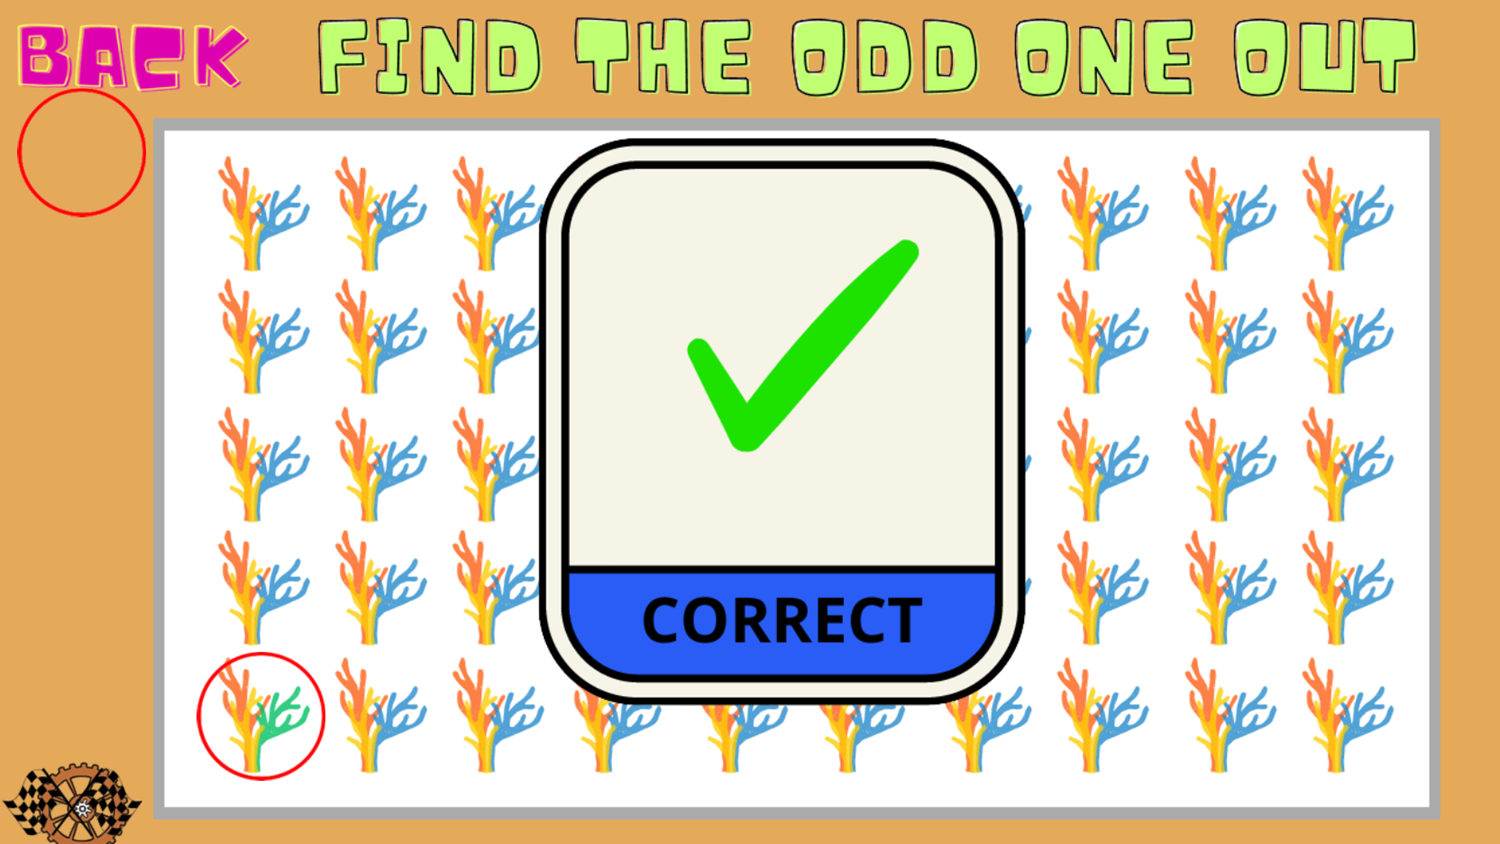 Find The Odd One Out Game Correct Screenshot.